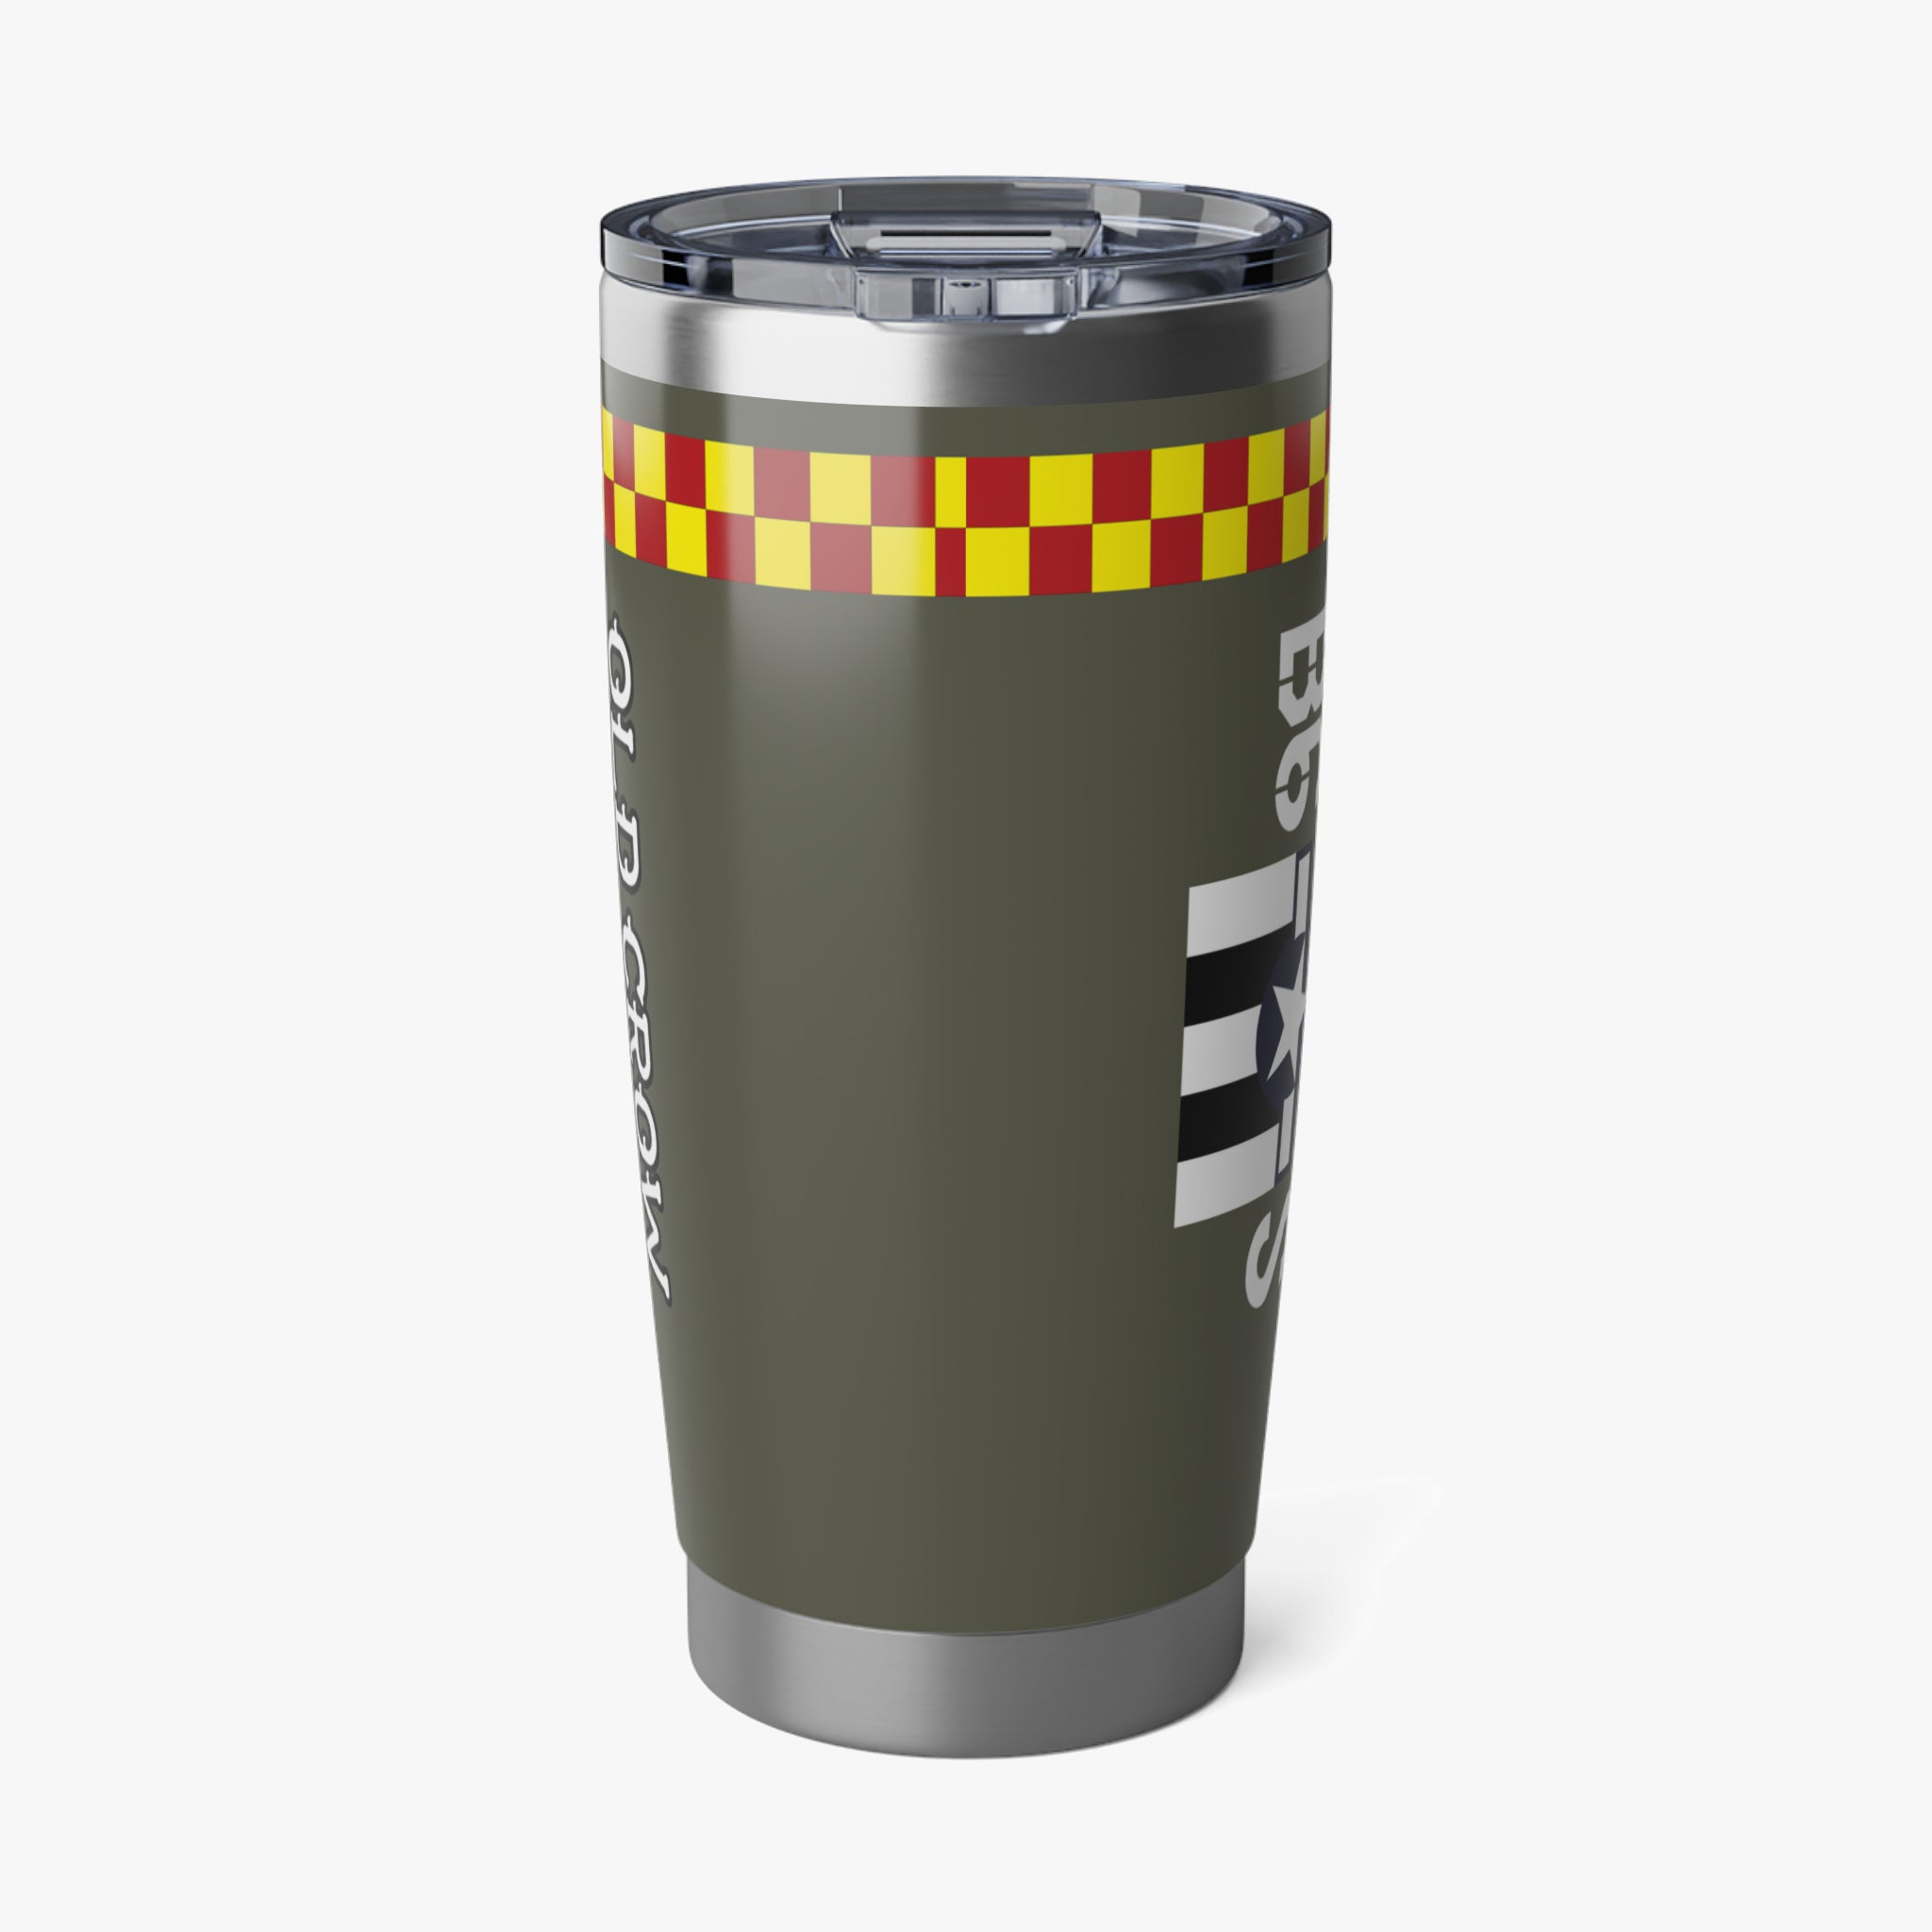 P-51 "Old Crow" (Olive Drab) Inspired 20oz (590ml) Stainless Steel Tumbler - I Love a Hangar